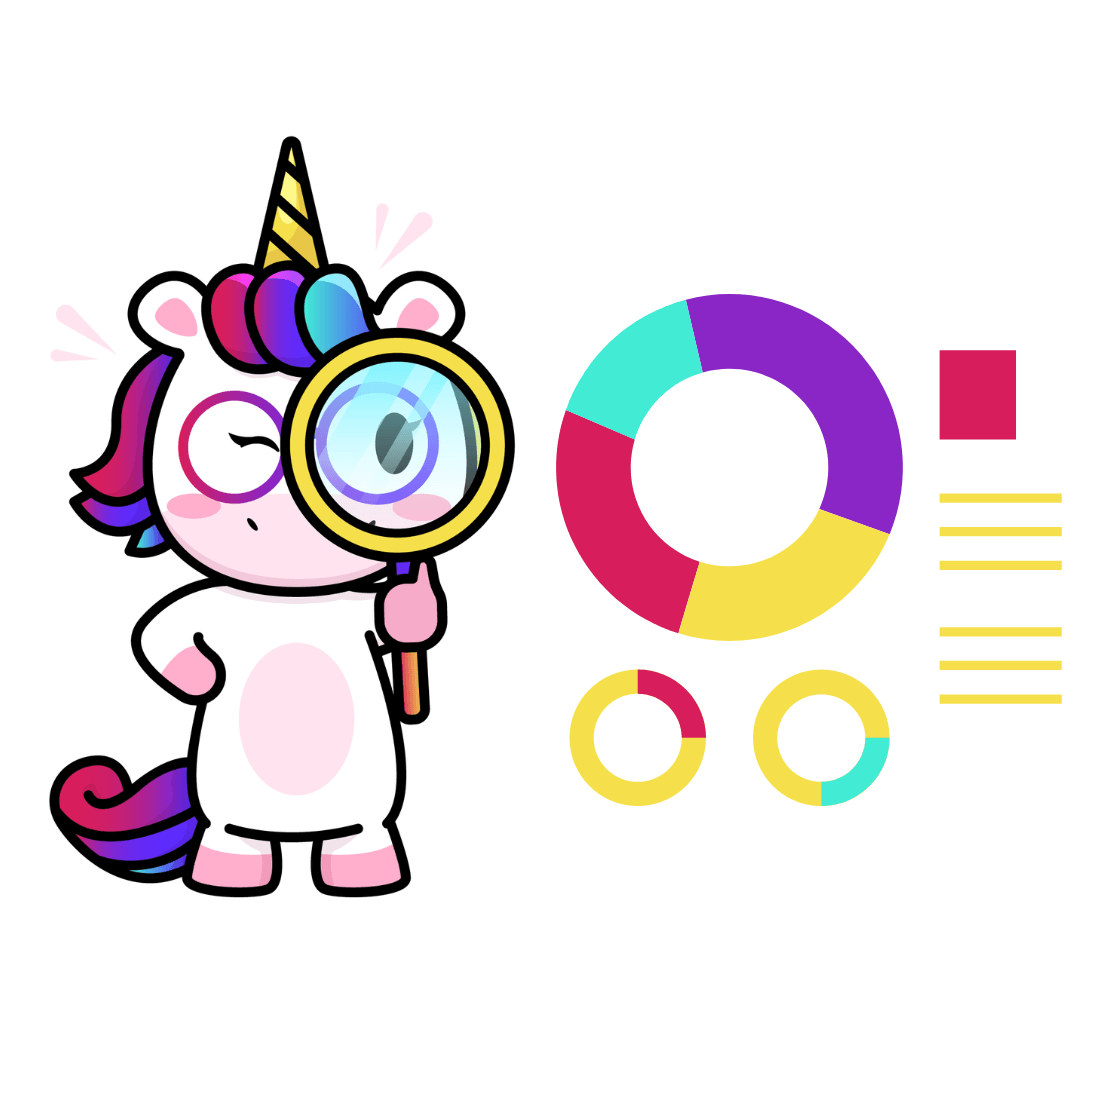 Site Unicorn will connect your Shopify store to your brand new Google Analytics 4 property that we will set up for you and create eCommerce specific custom reports for you in your new GA4 account.